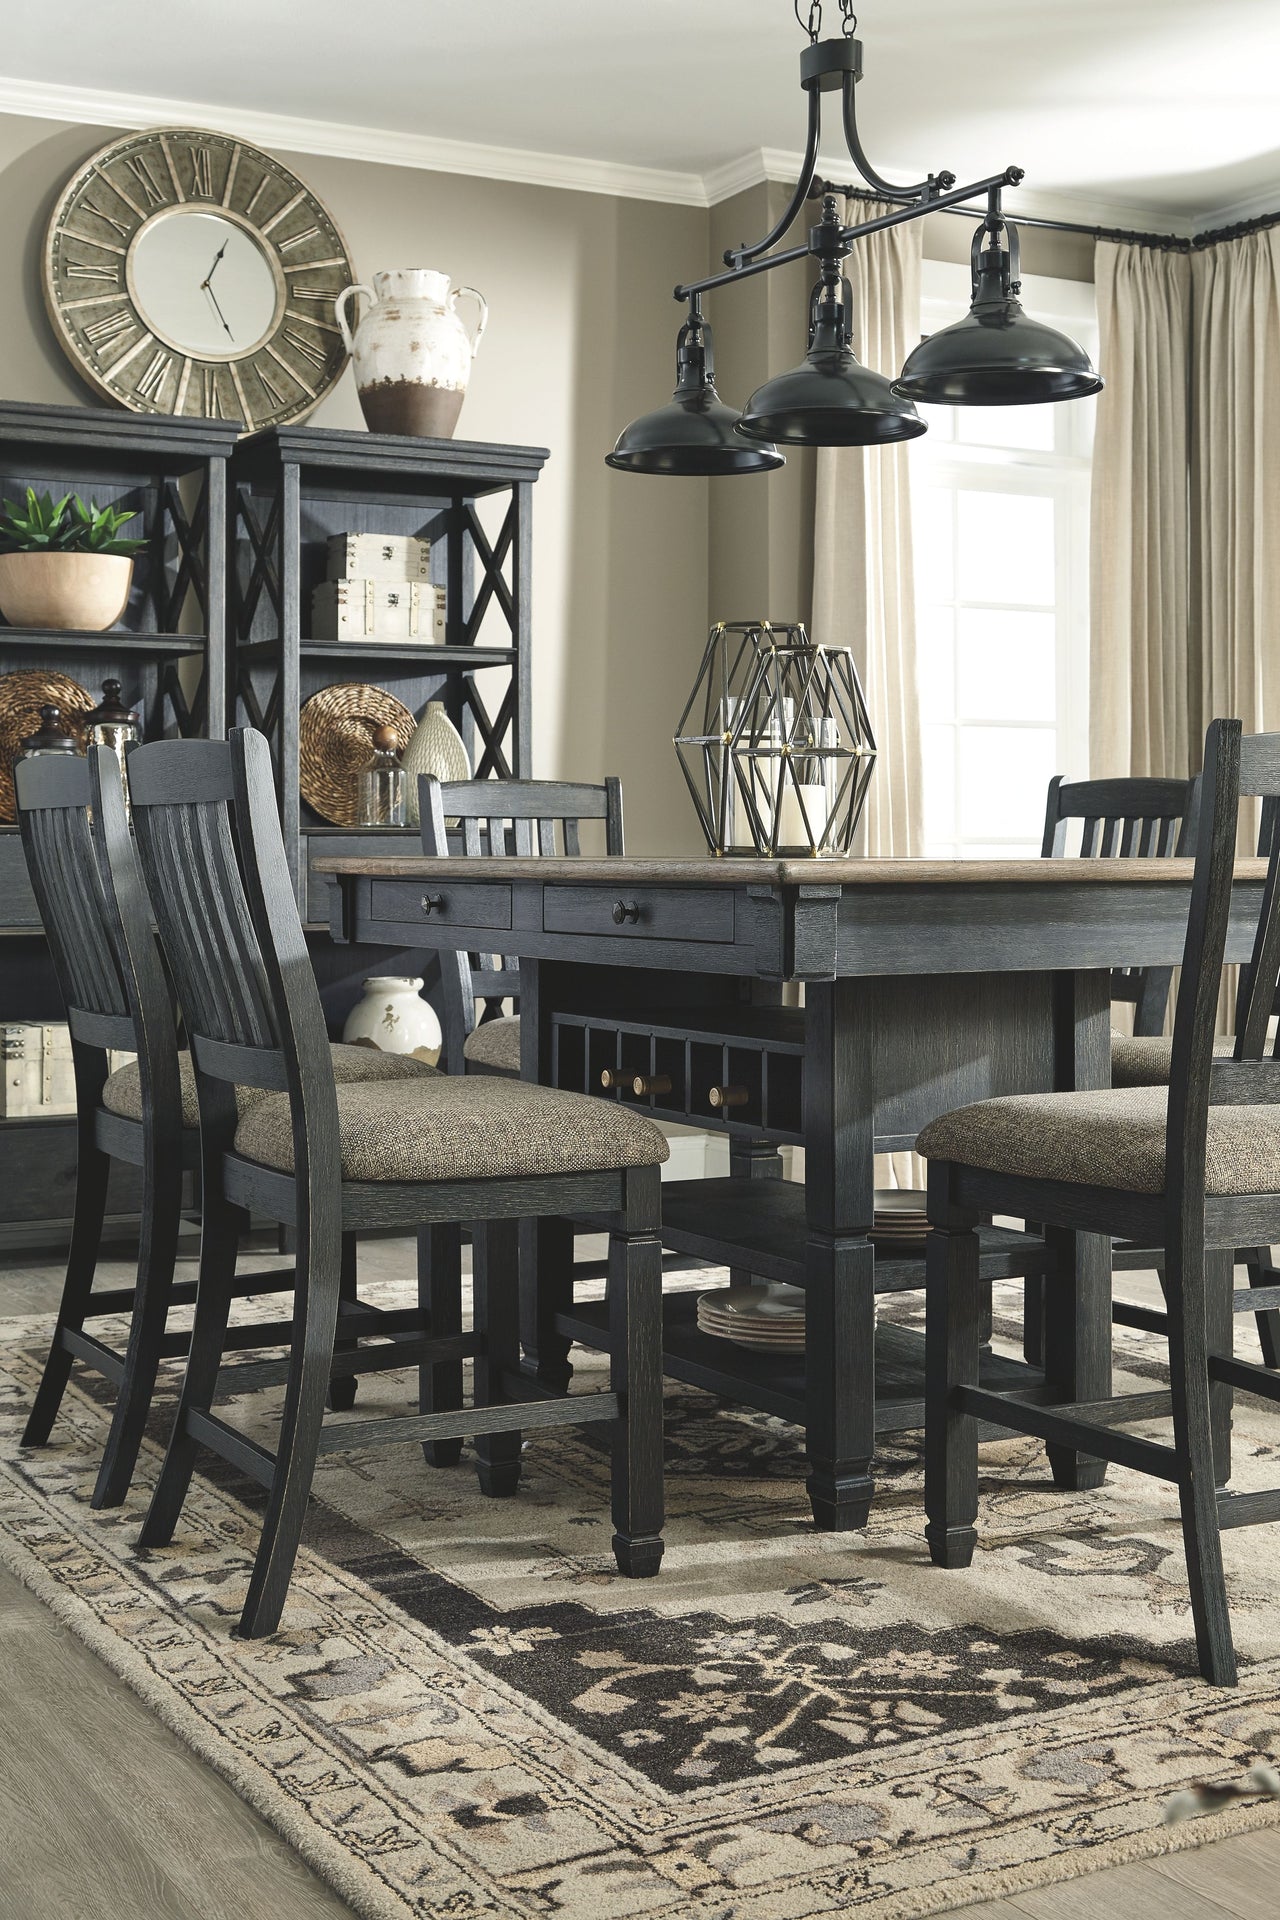 Tyler Creek - Counter Height Table Set - Tony's Home Furnishings